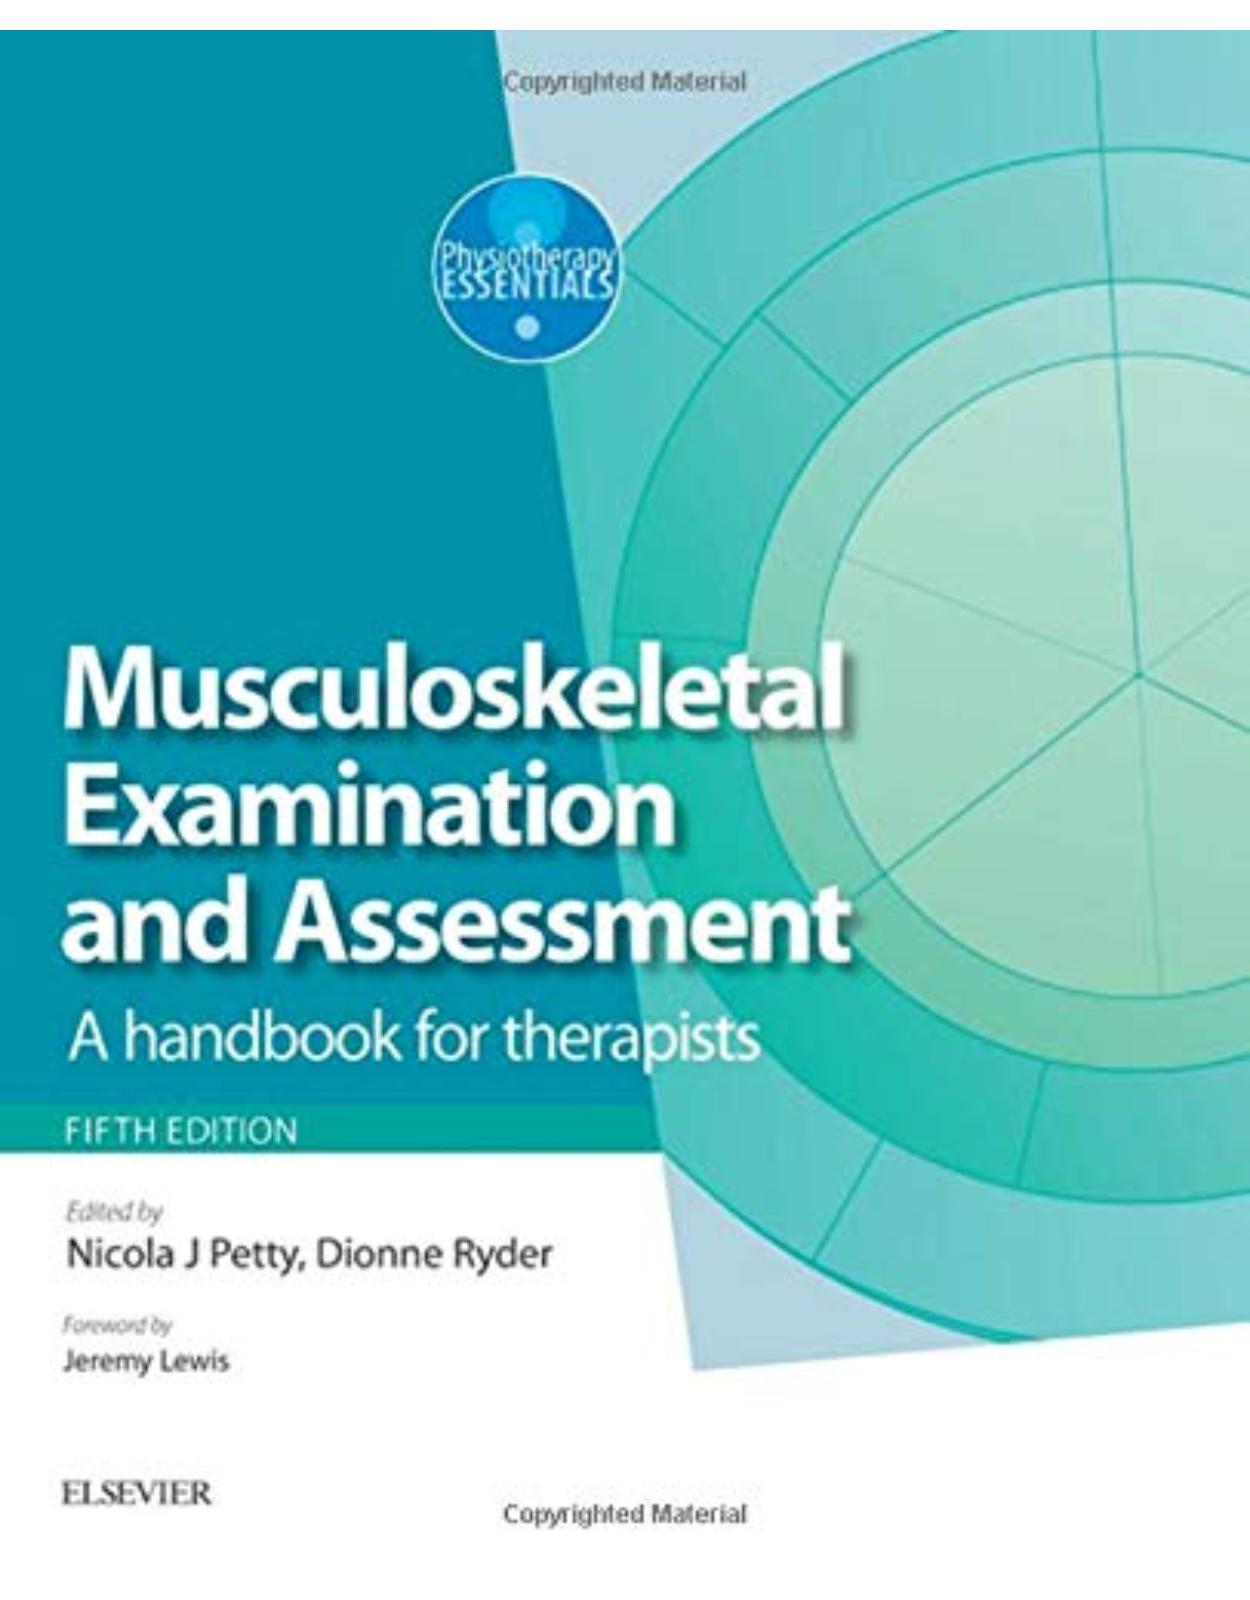 Musculoskeletal Examination and Assessment - Volume 1: A Handbook for Therapists, 5e